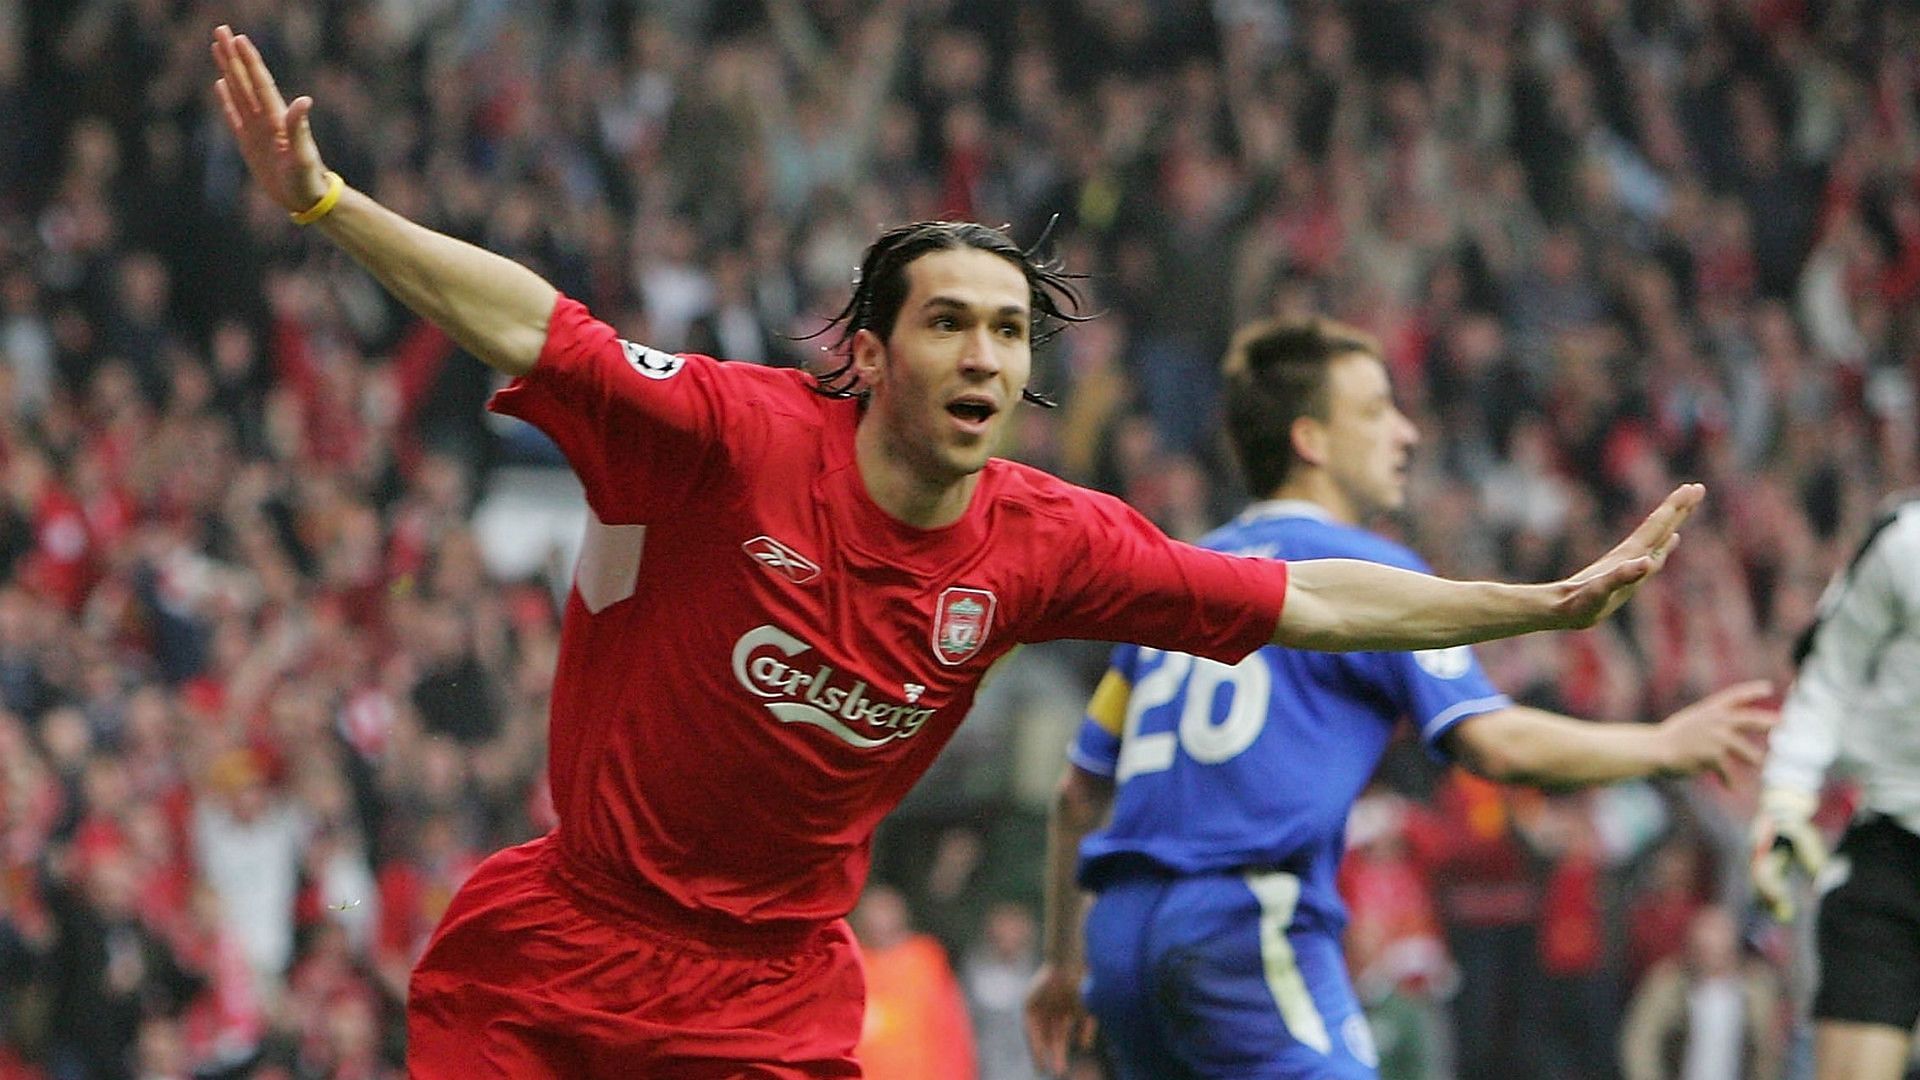 Garcia won the Champions League in his first season with Liverpool.